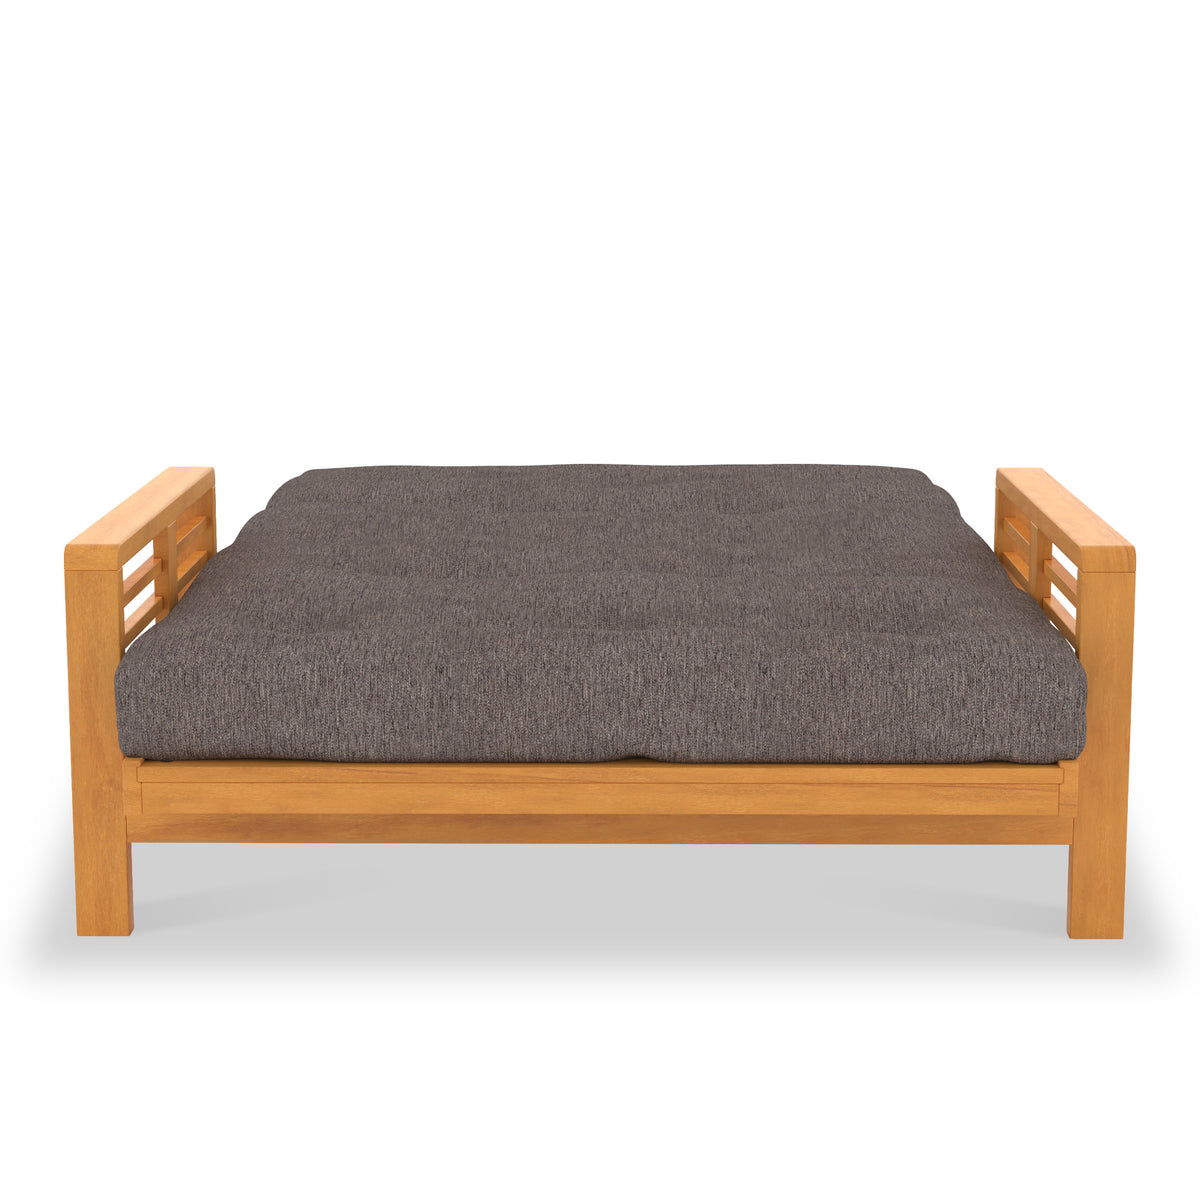 Bristow Bark Small Double Futon Sofabed from Roseland